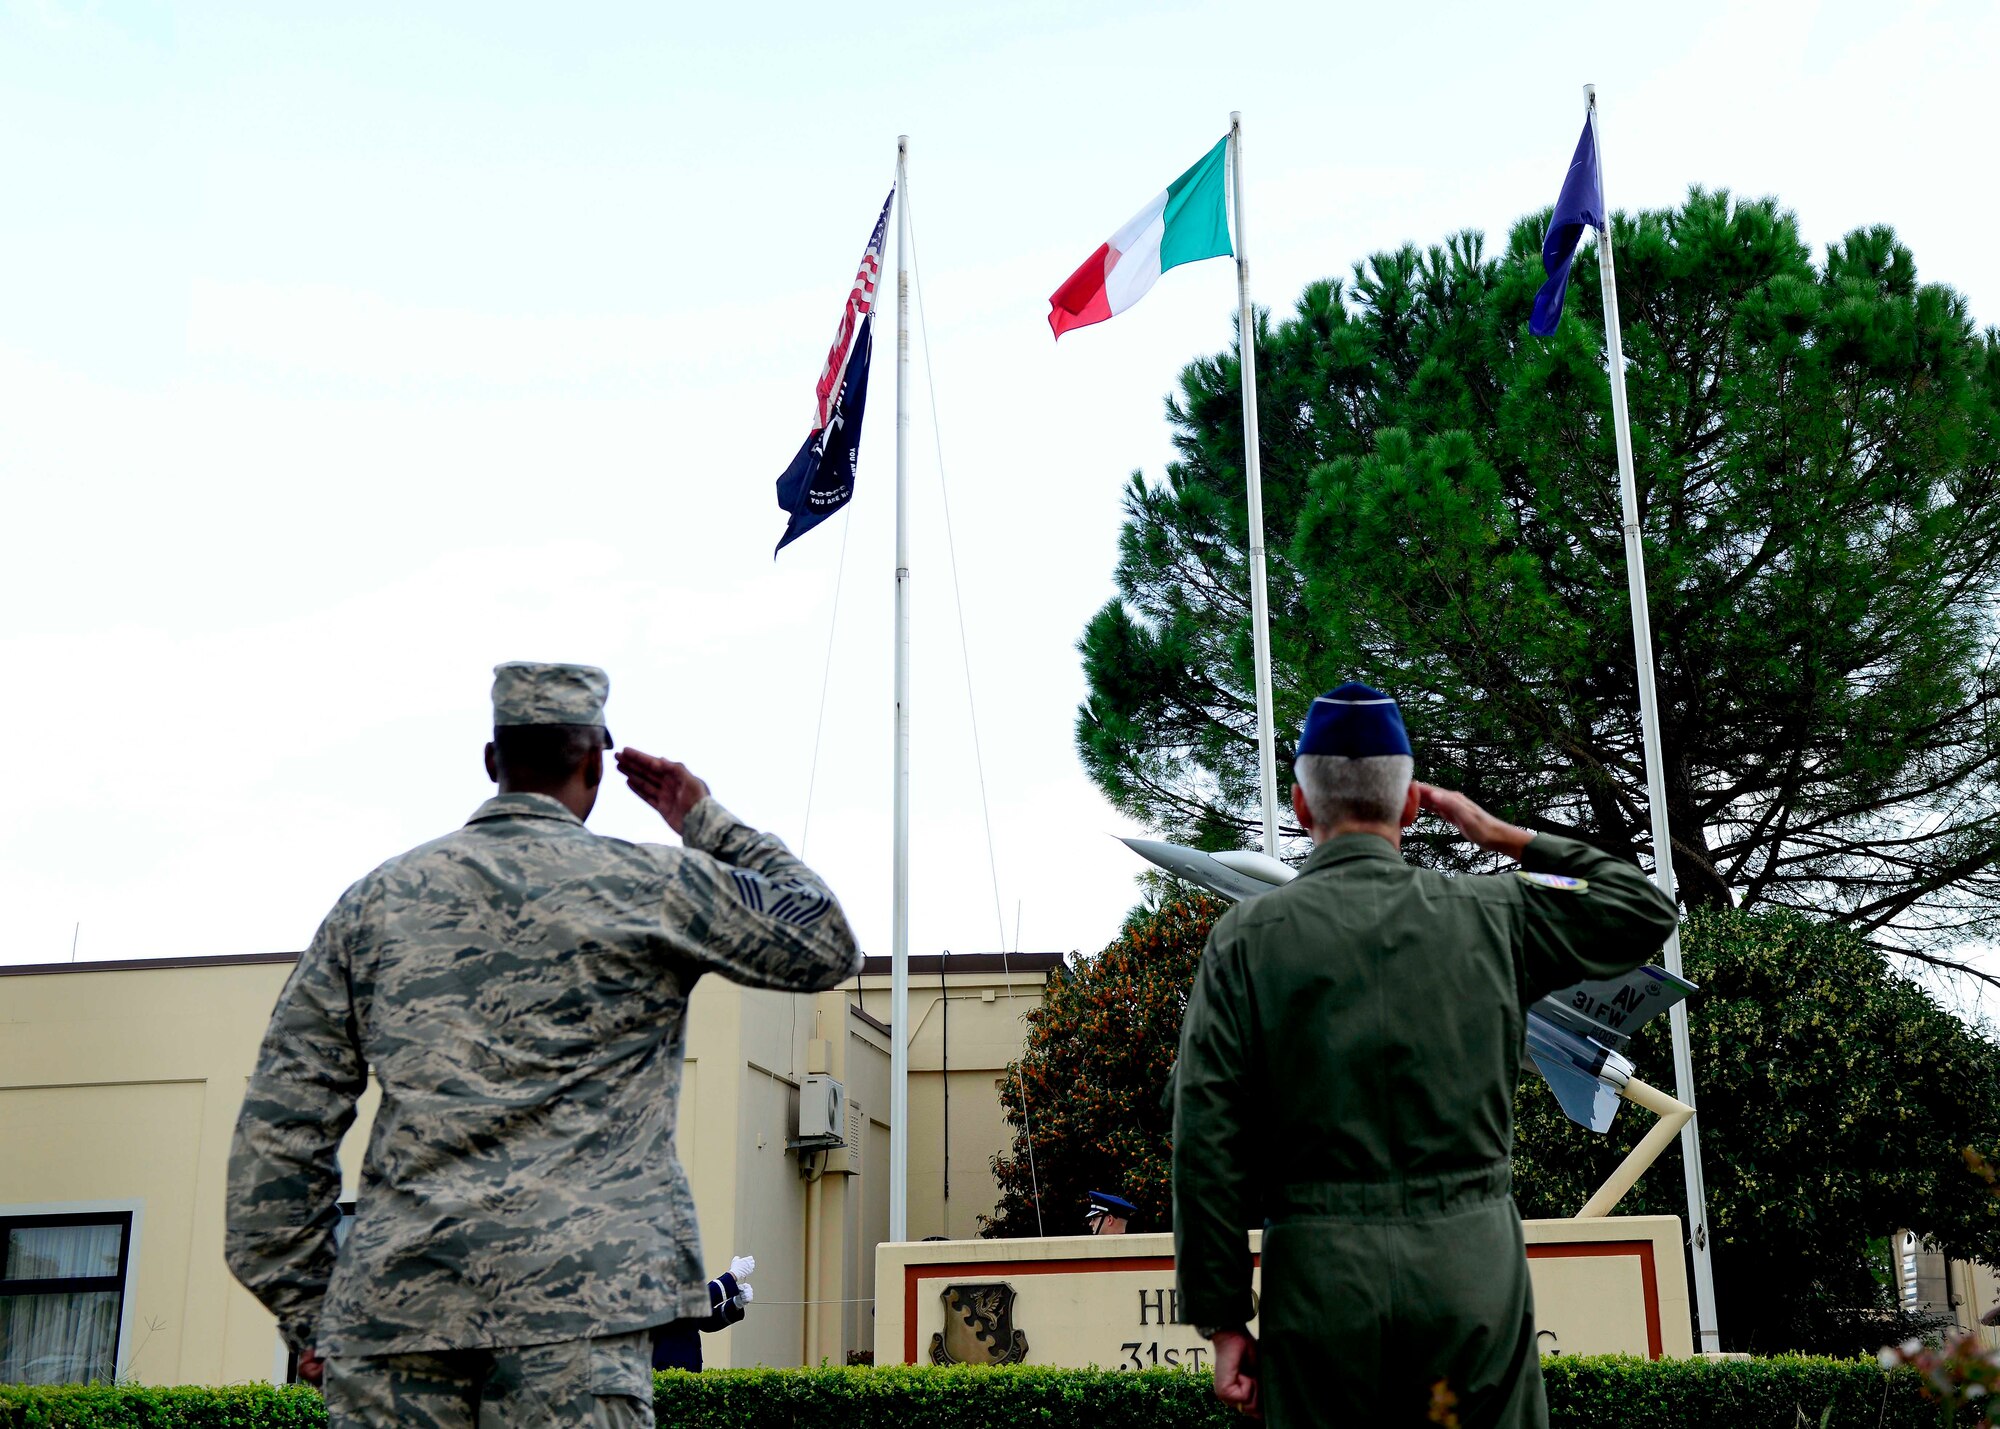 U.S. Air Force Chief Master Sgt. Anthony W. Johnson, 31st Fighter Wing command chief, and Brig. Gen. Barre R. Seguin, 31st FW commander, salute  the Italian, U.S. and Prisoner of War/Missing in Action flags during the POW/MIA Remembrance Week retreat ceremony, Sept. 17, 2015, at Aviano Air Base, Italy. According to the Defense POW/MIA Accounting Agency, there are still 83,114 service members, since World War II, who are unaccounted for. (U.S. Air Force photo by Senior Airman Areca T. Bell/Released)